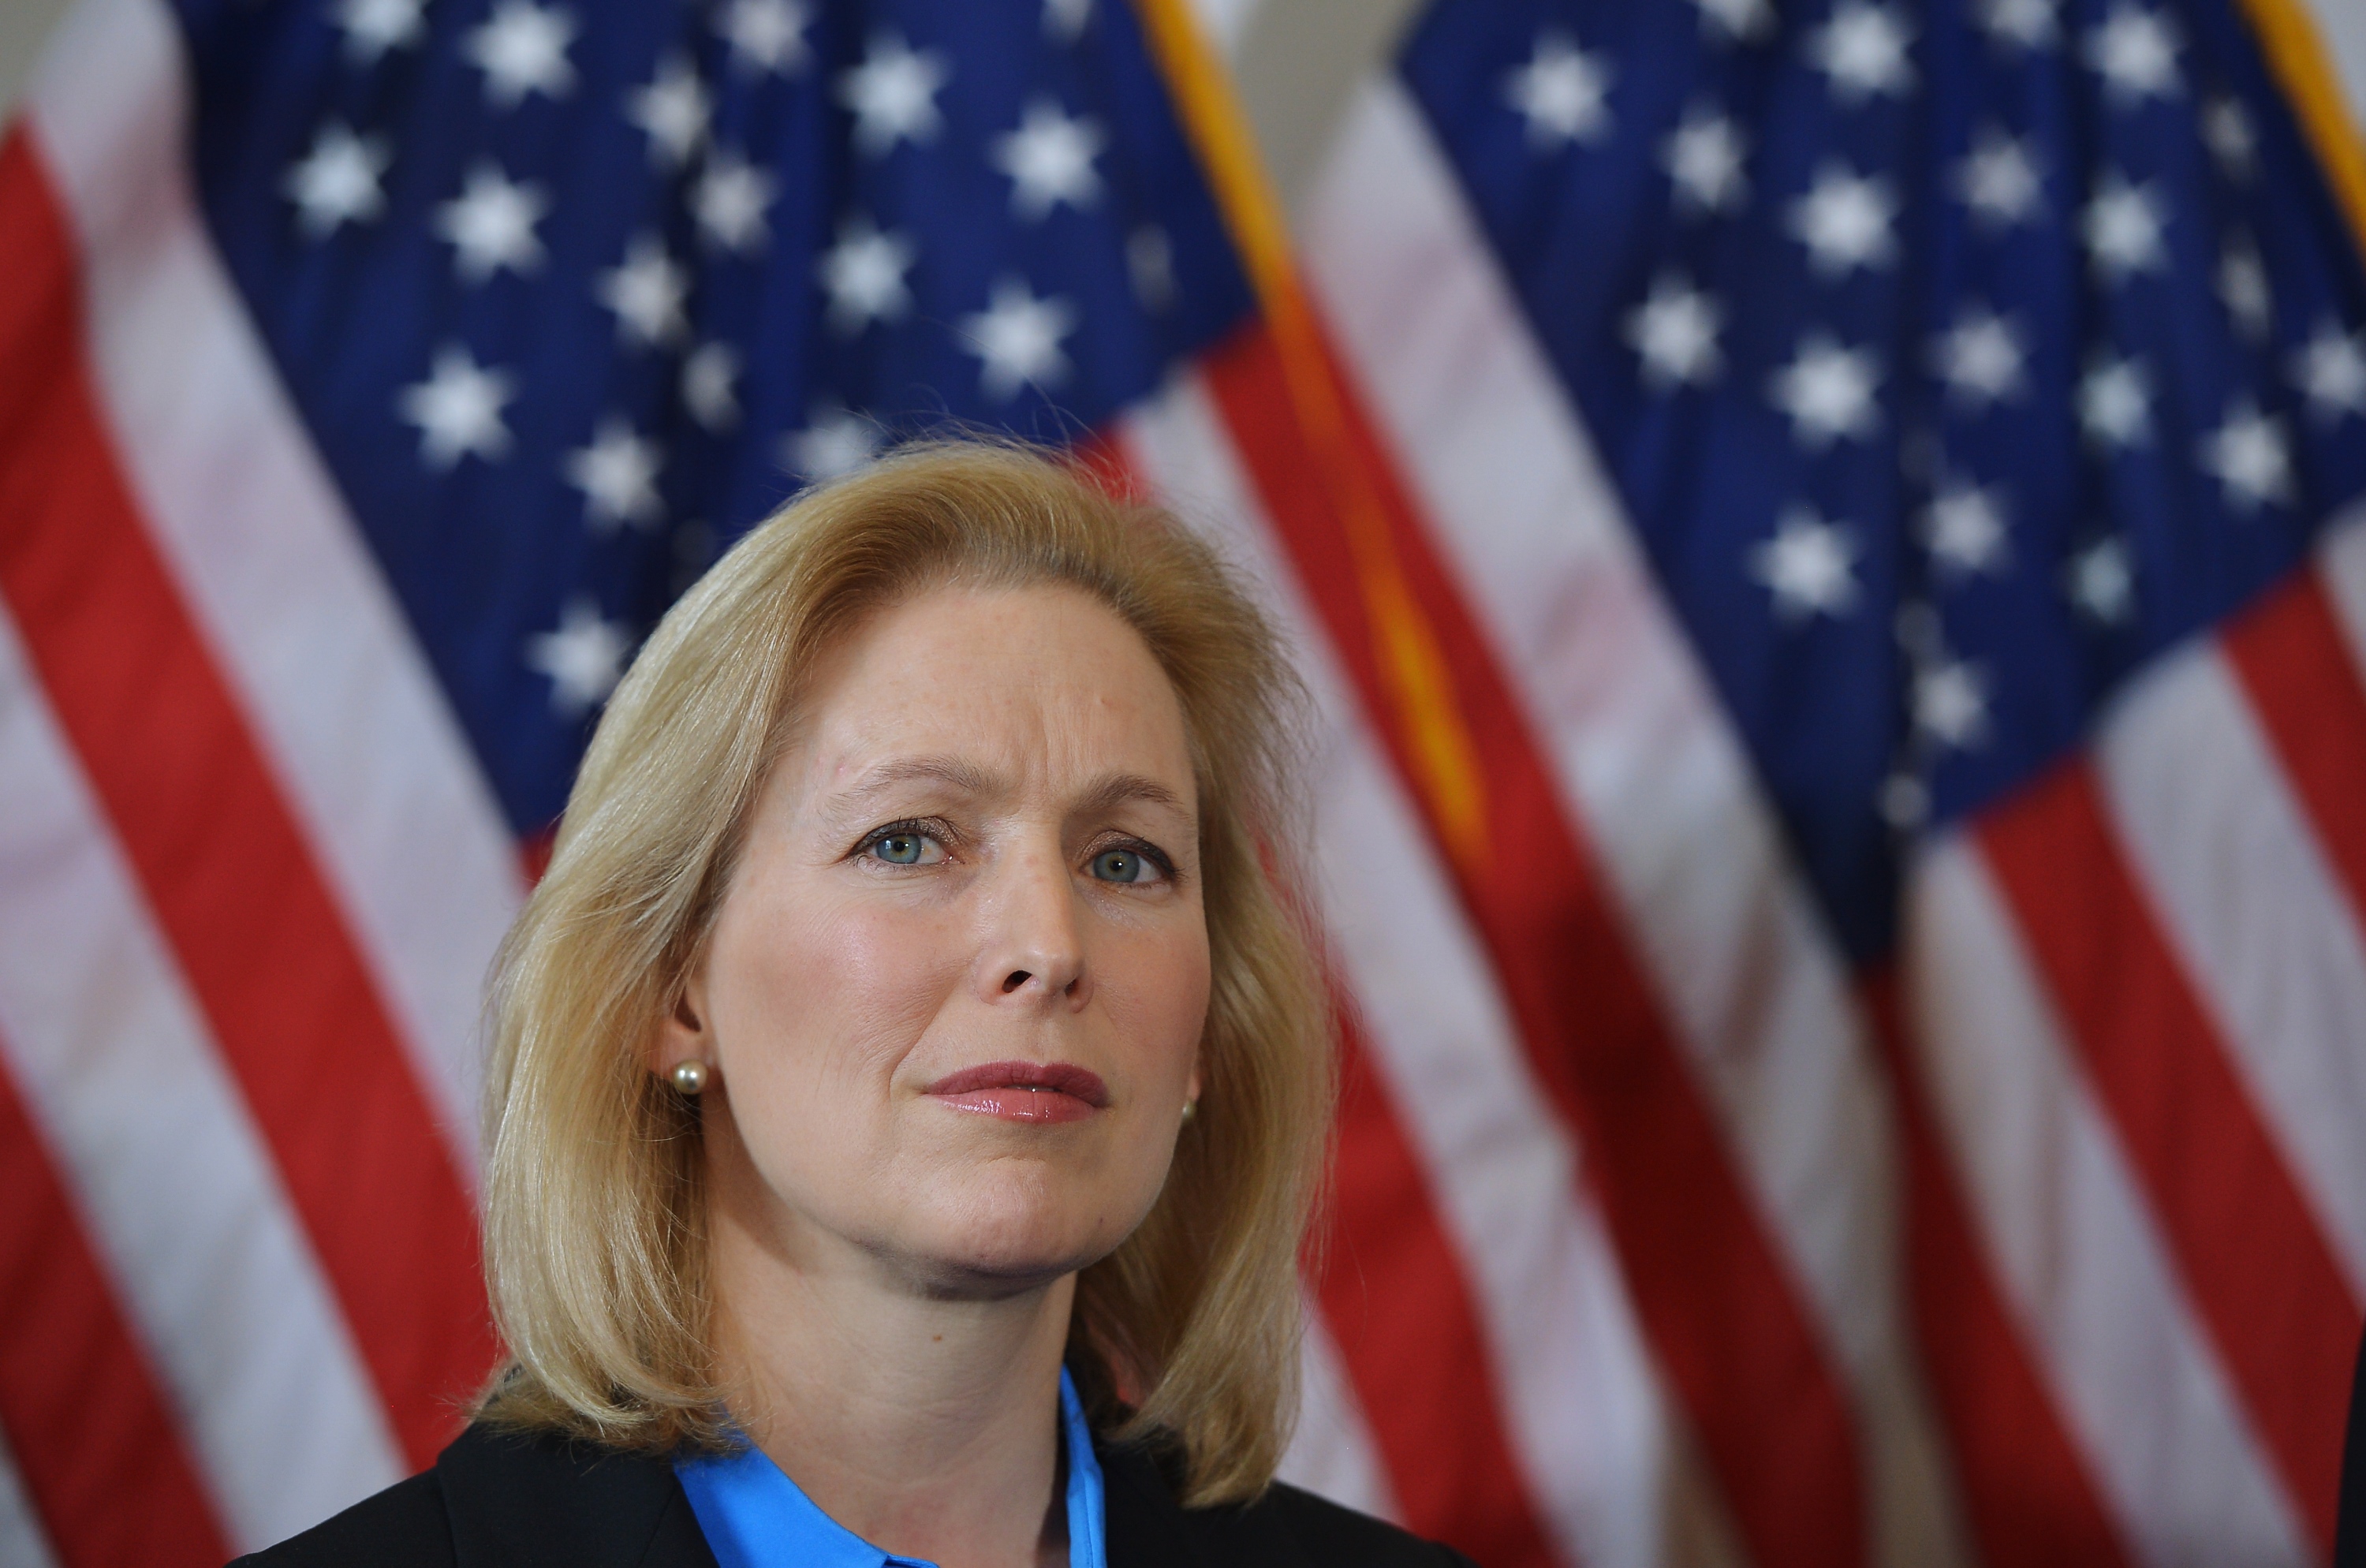 Senator Kirsten Gillibrand, D-NY attends a press conference calling for the creation of an independent military justice system to deal with sexual harassment and assault in the military, in the Russell Senate Office Building on Capitol Hill in Washington, DC on Feb. 6, 2014. (Mandel Ngan—AFP/Getty Images)